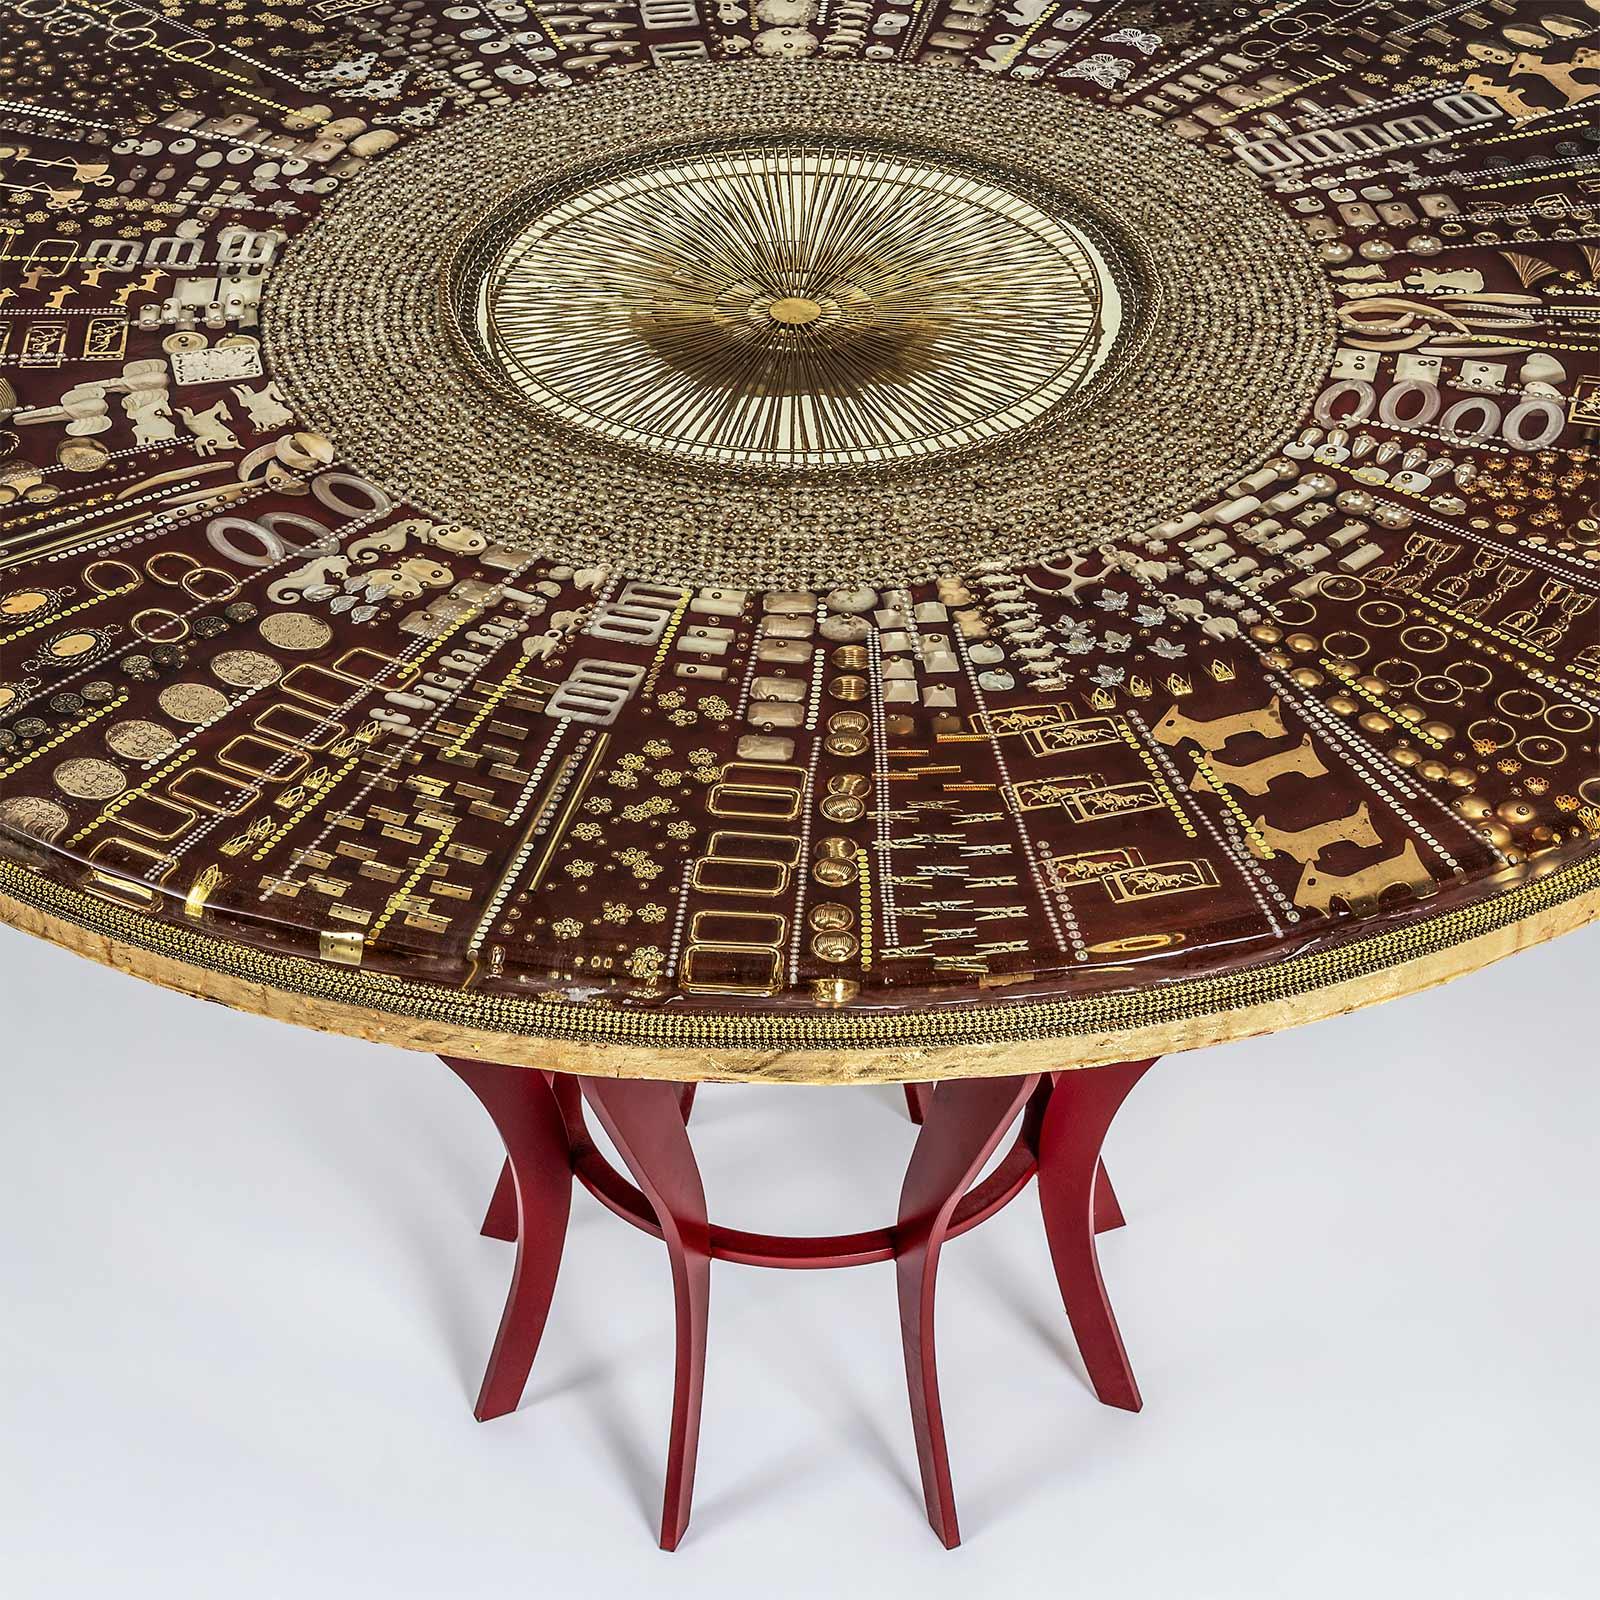 Handmade round table in resin and iron. A 3d composition made using different layers of resin. Each layer contains different kinds of objects, mixing precious material like gold, brass and small daily objects like pin, buttons, chopsticks and many